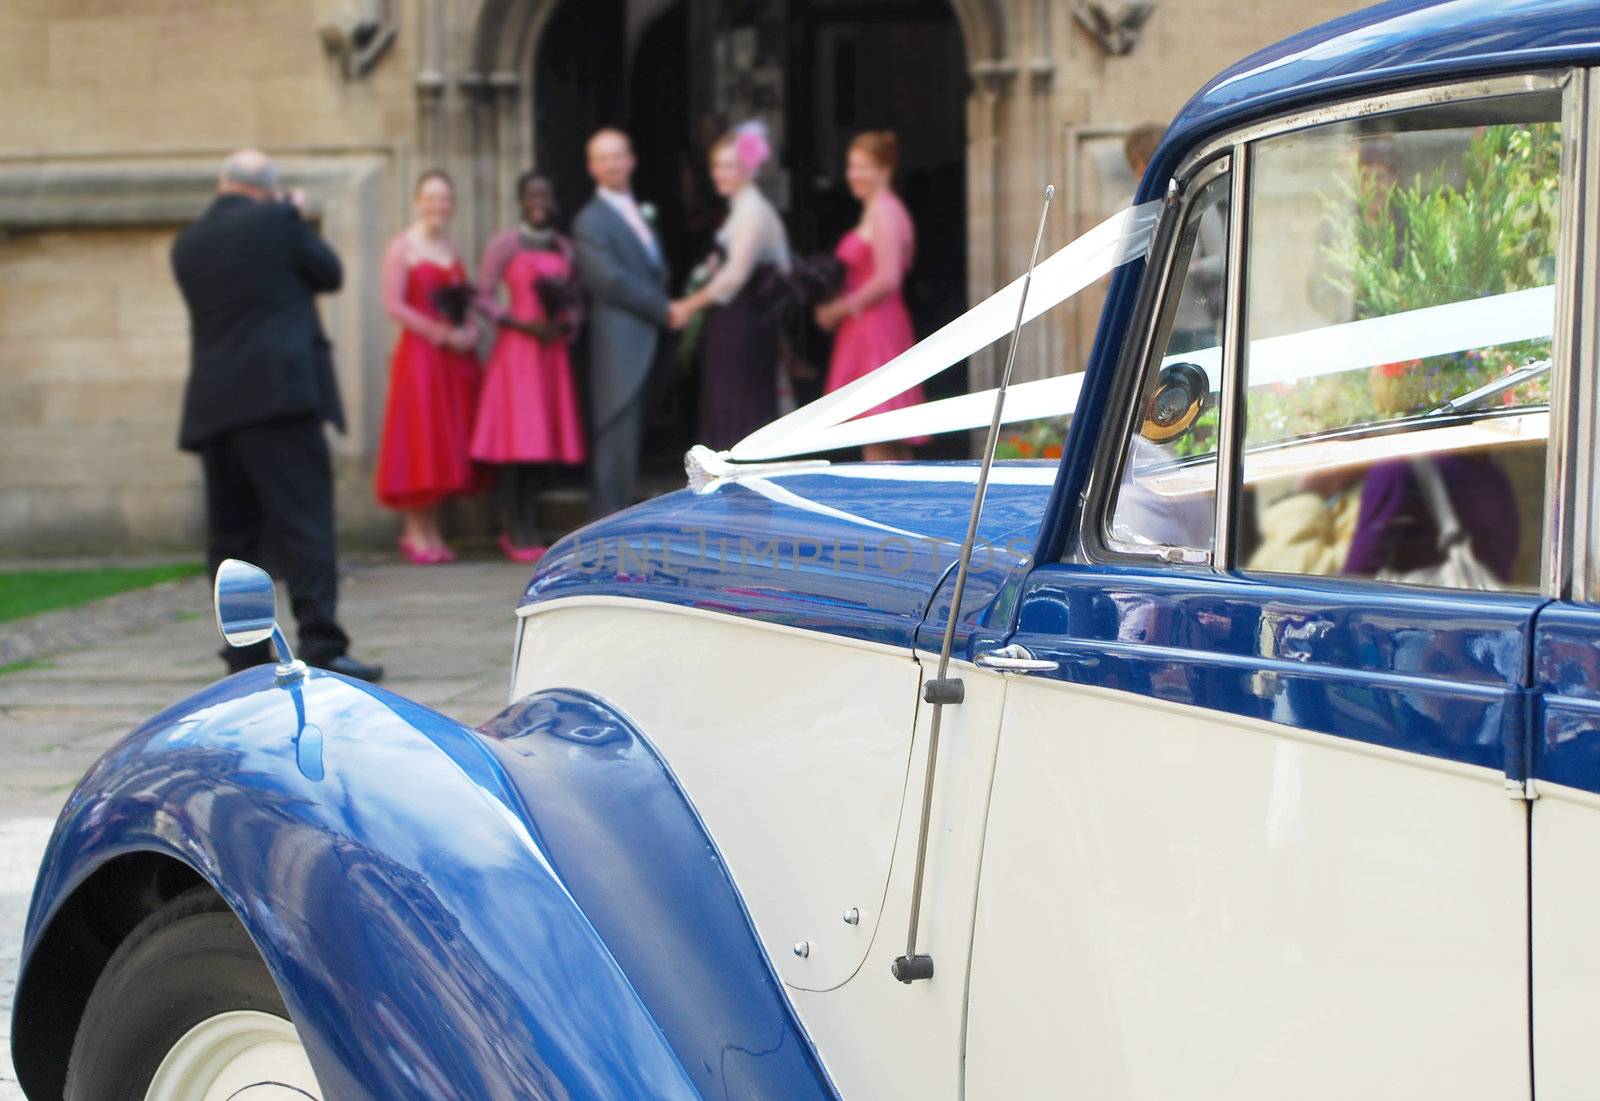 Vintage wedding car with wedding party in background